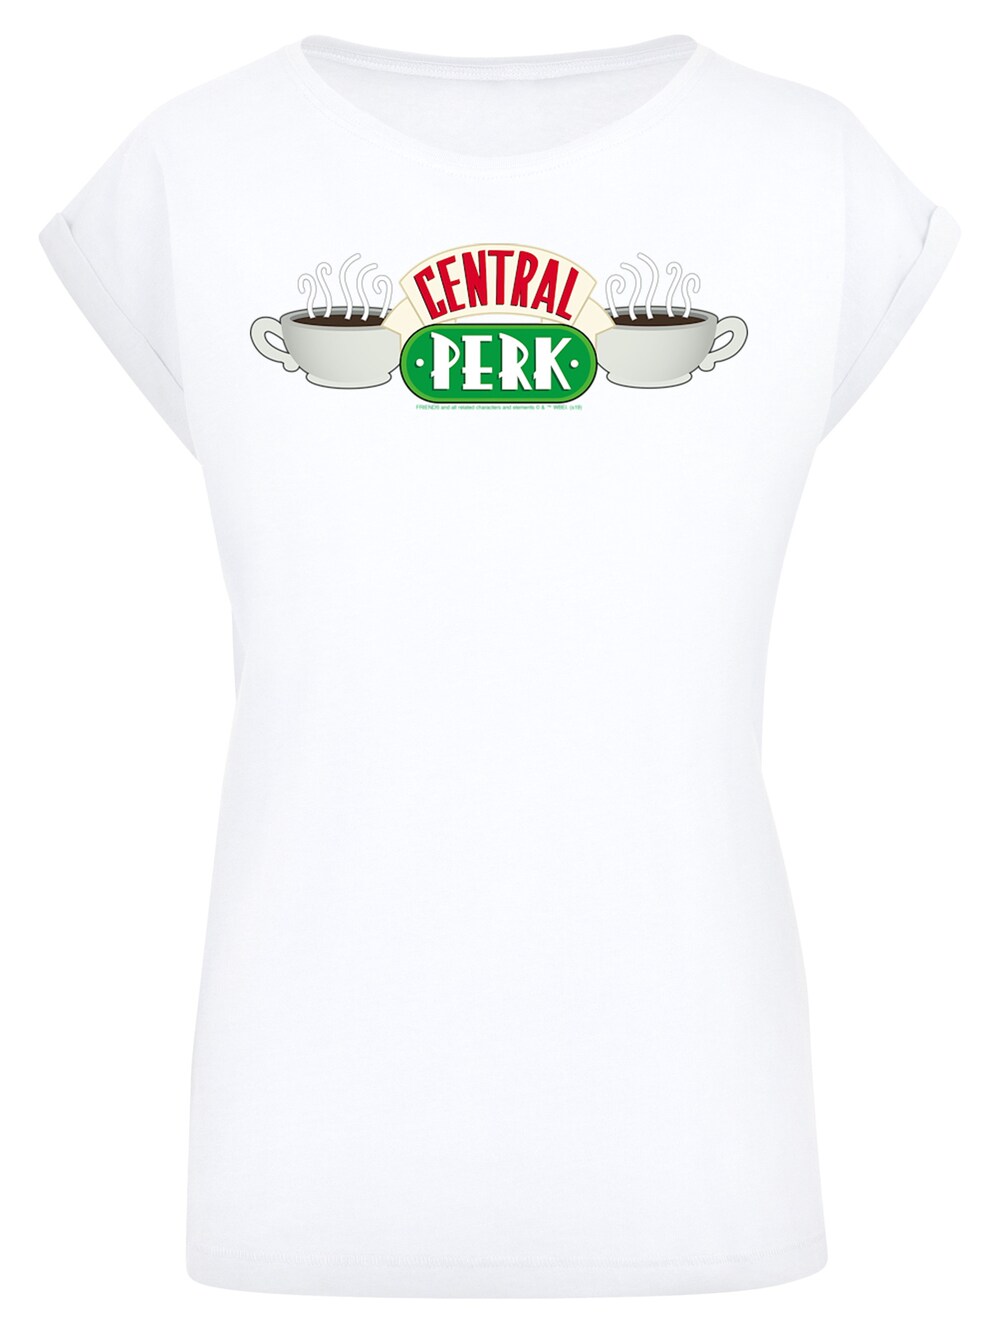 Рубашка F4Nt4Stic Friends Central Perk, белый фляга friends central perk